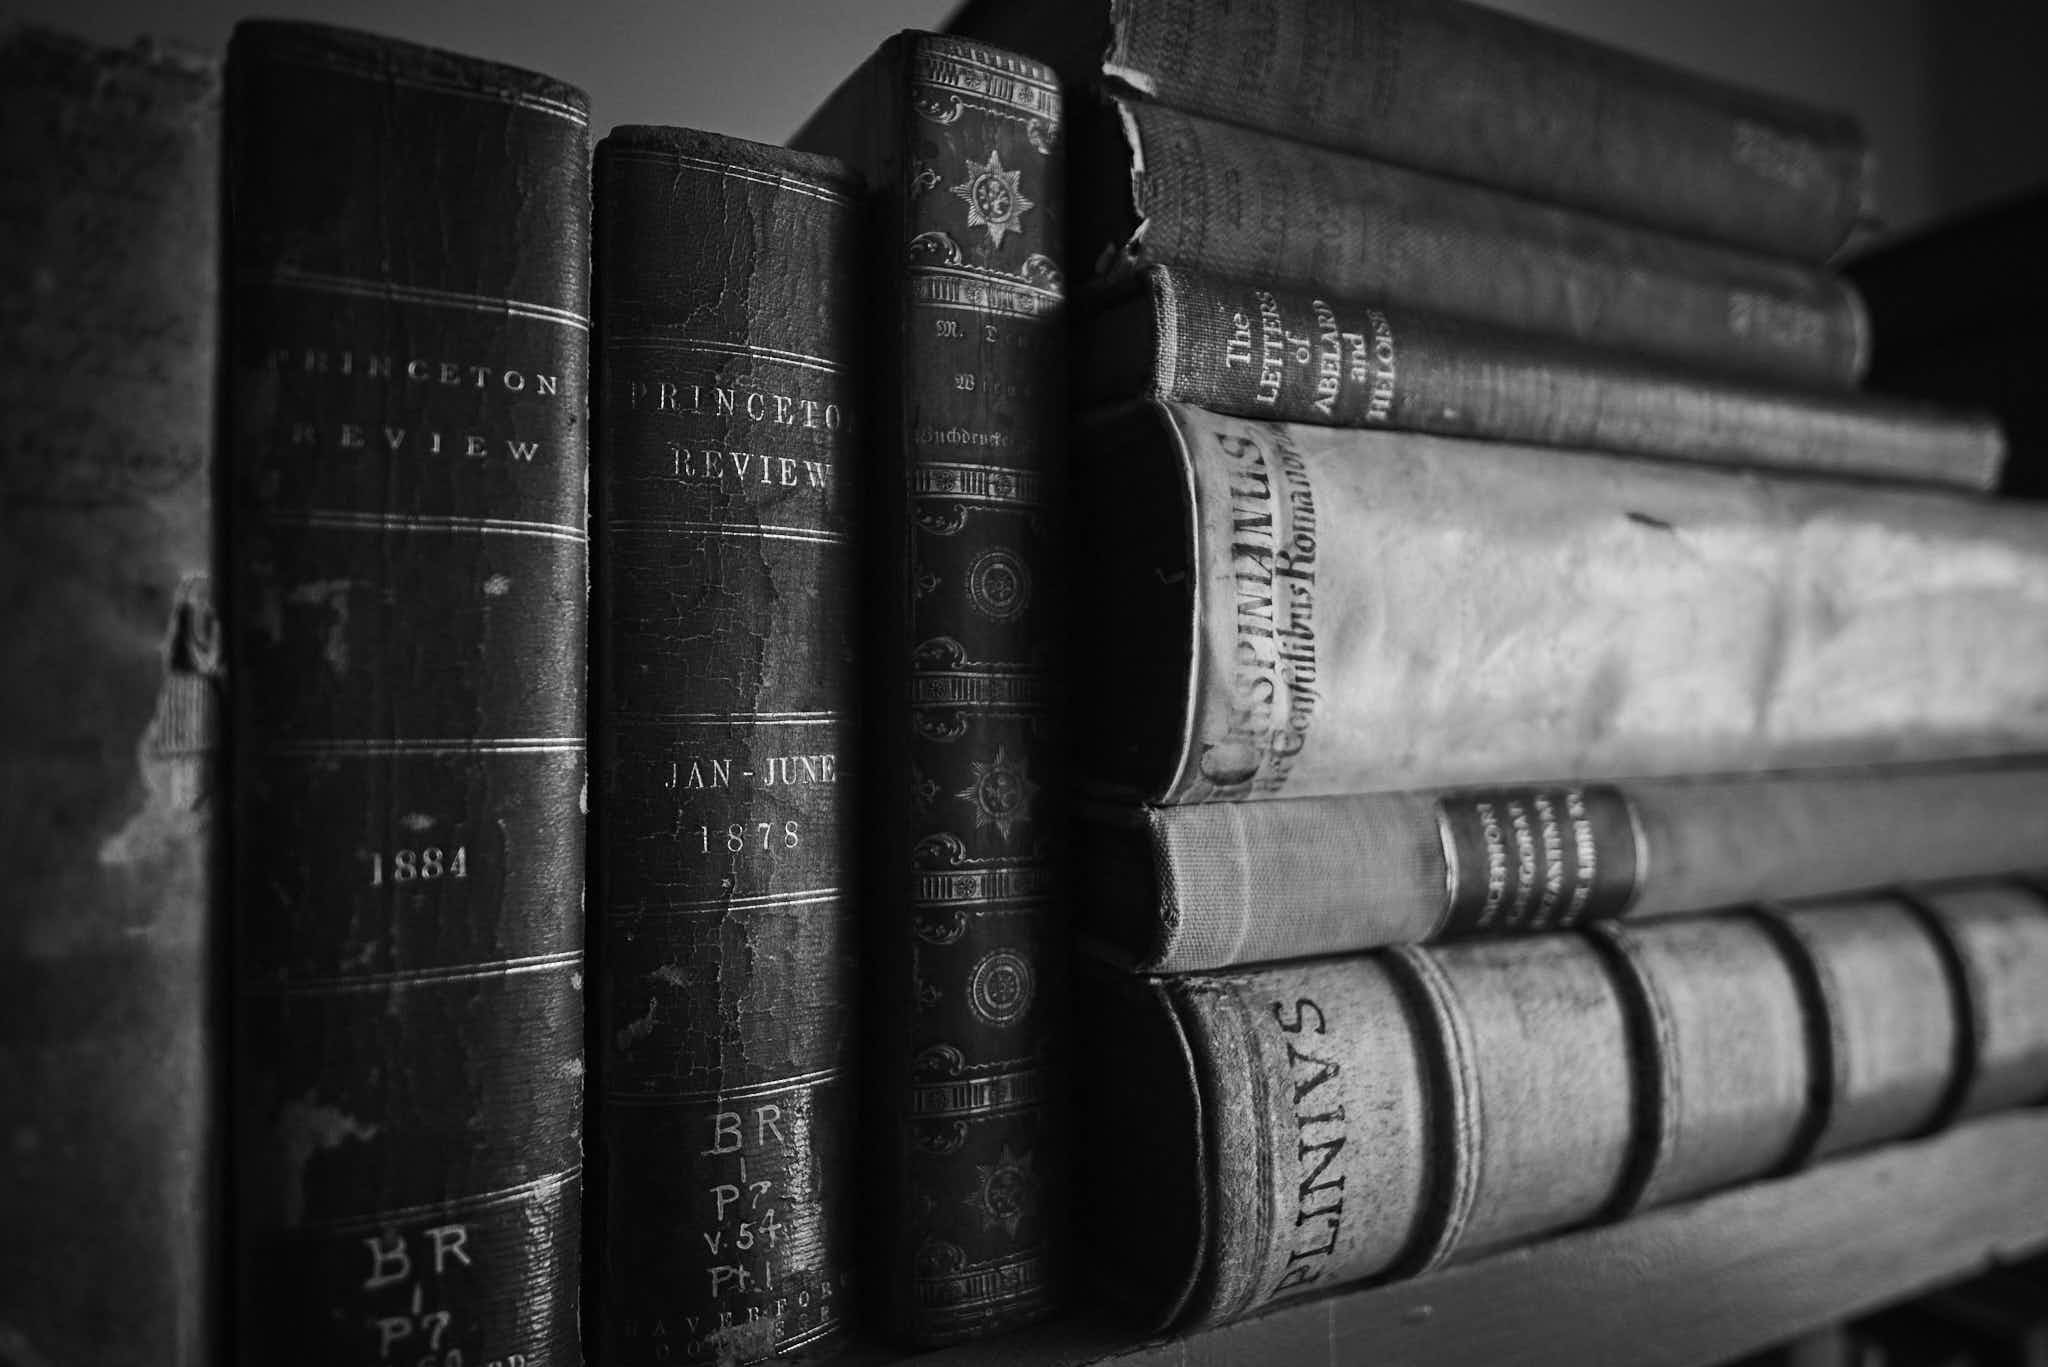 Still life #240331.2. A black and white photograph of old books on a shelf.